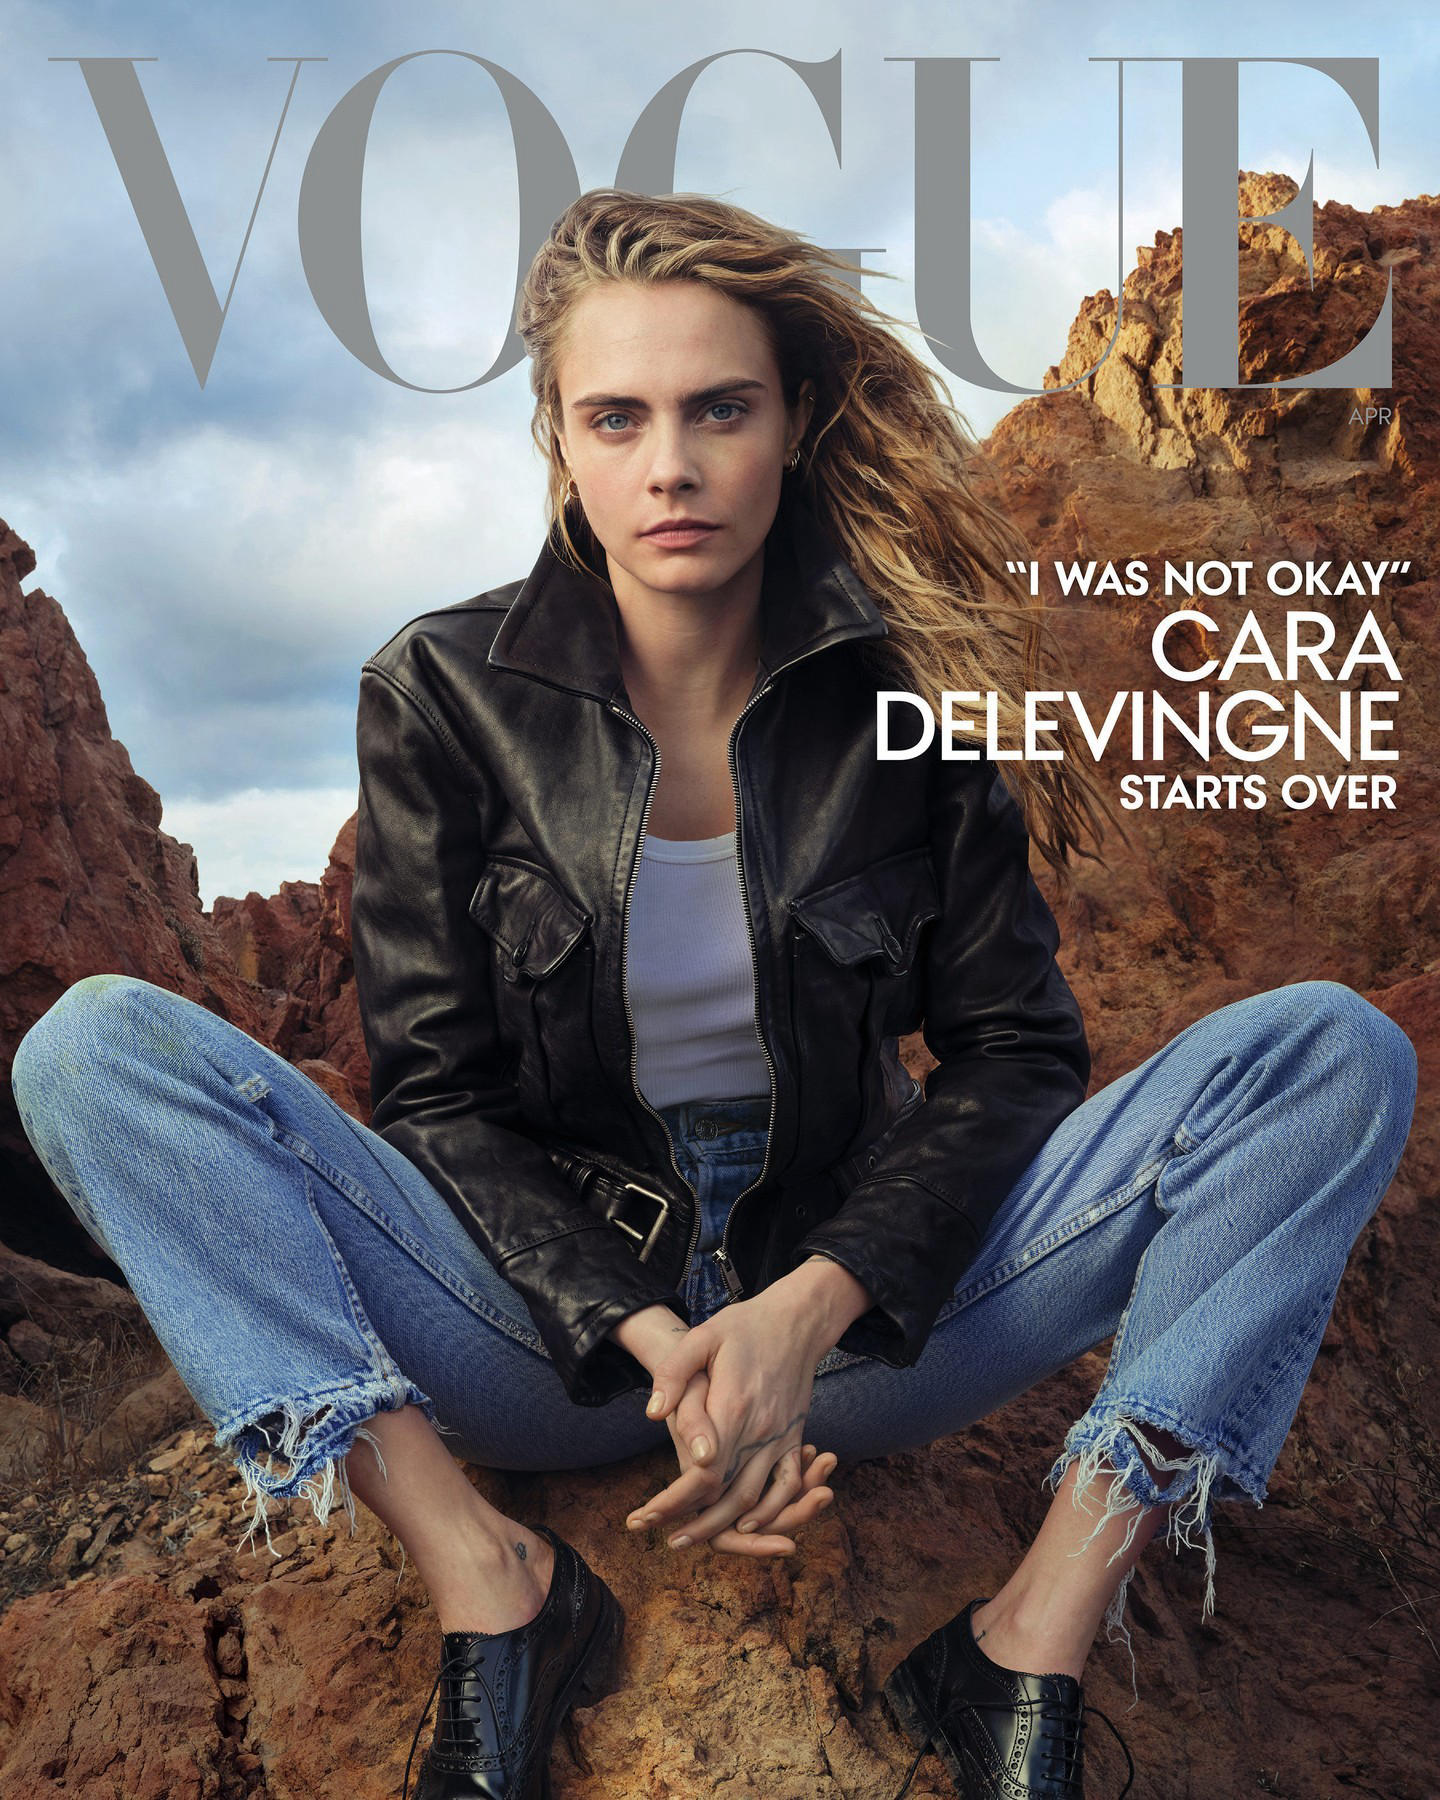 image  1 #CaraDelevingne is ready to start over